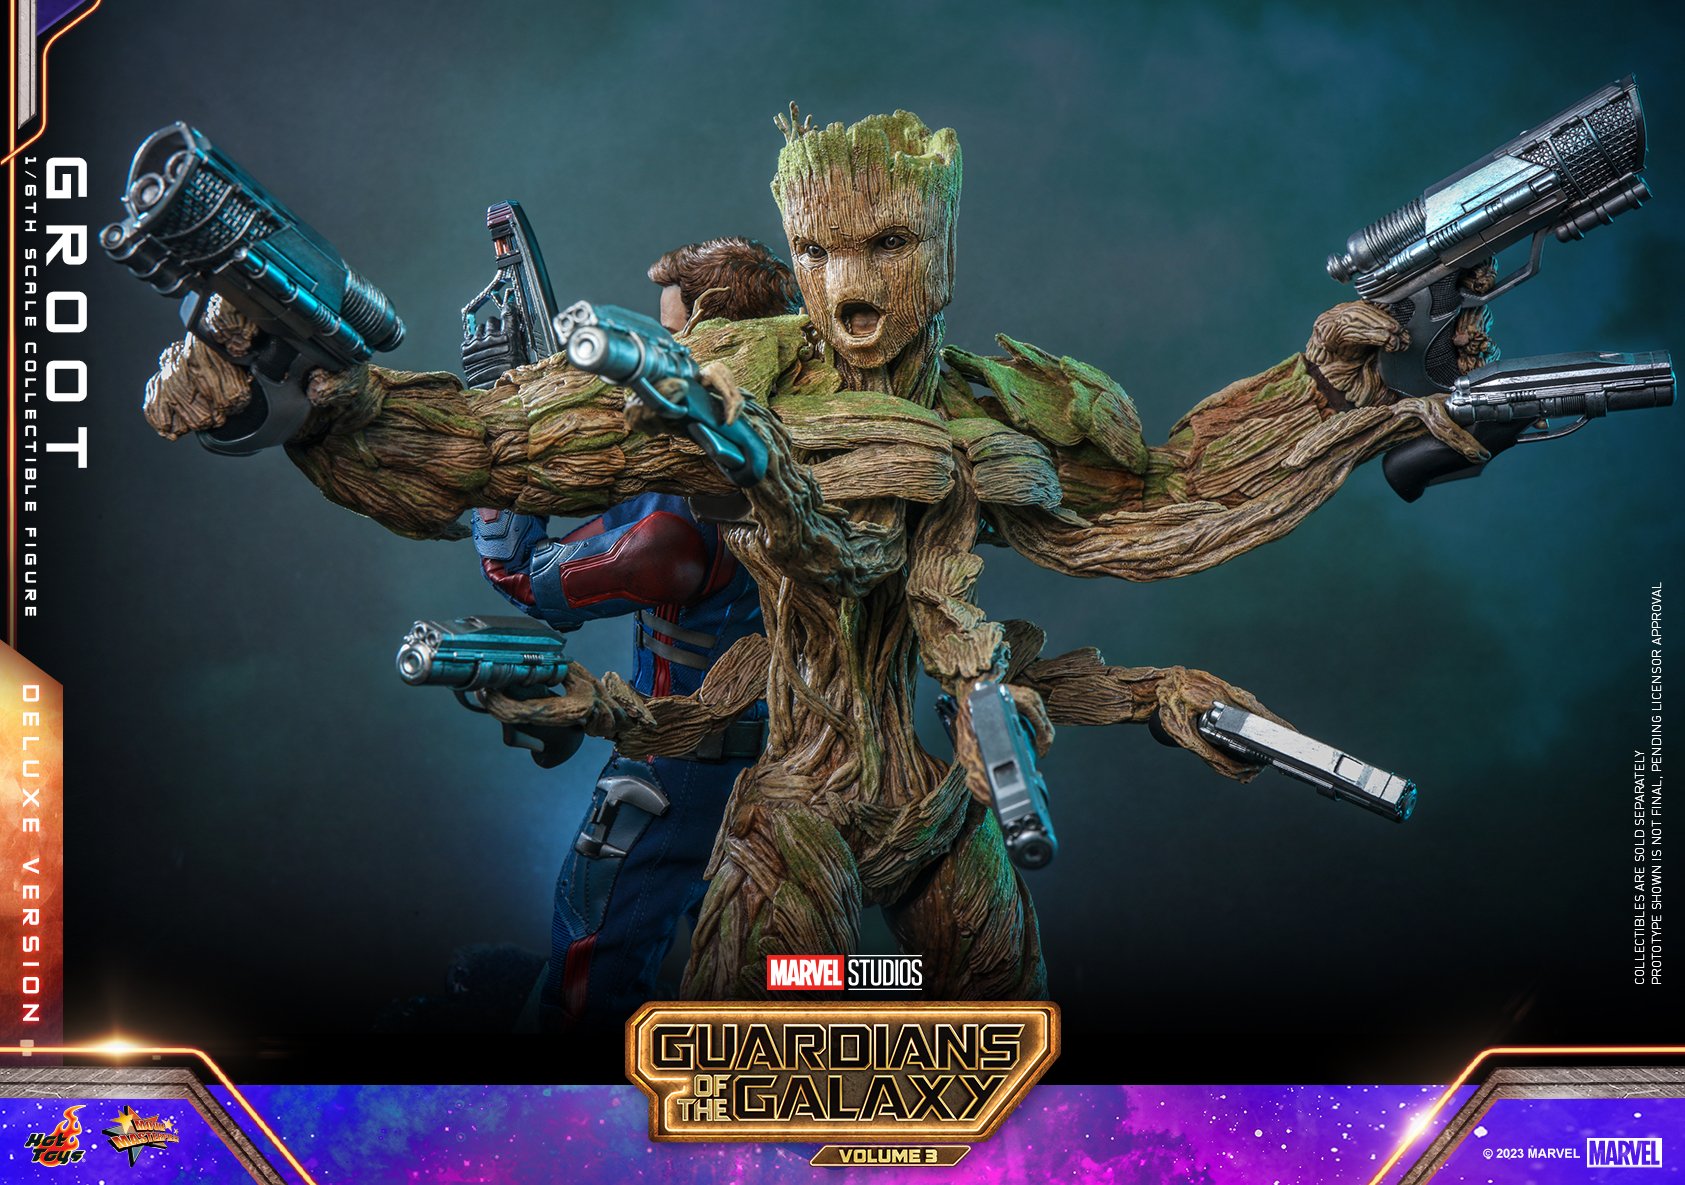 Hot-Toys-GotG3-Groot-Deluxe-005.jpeg